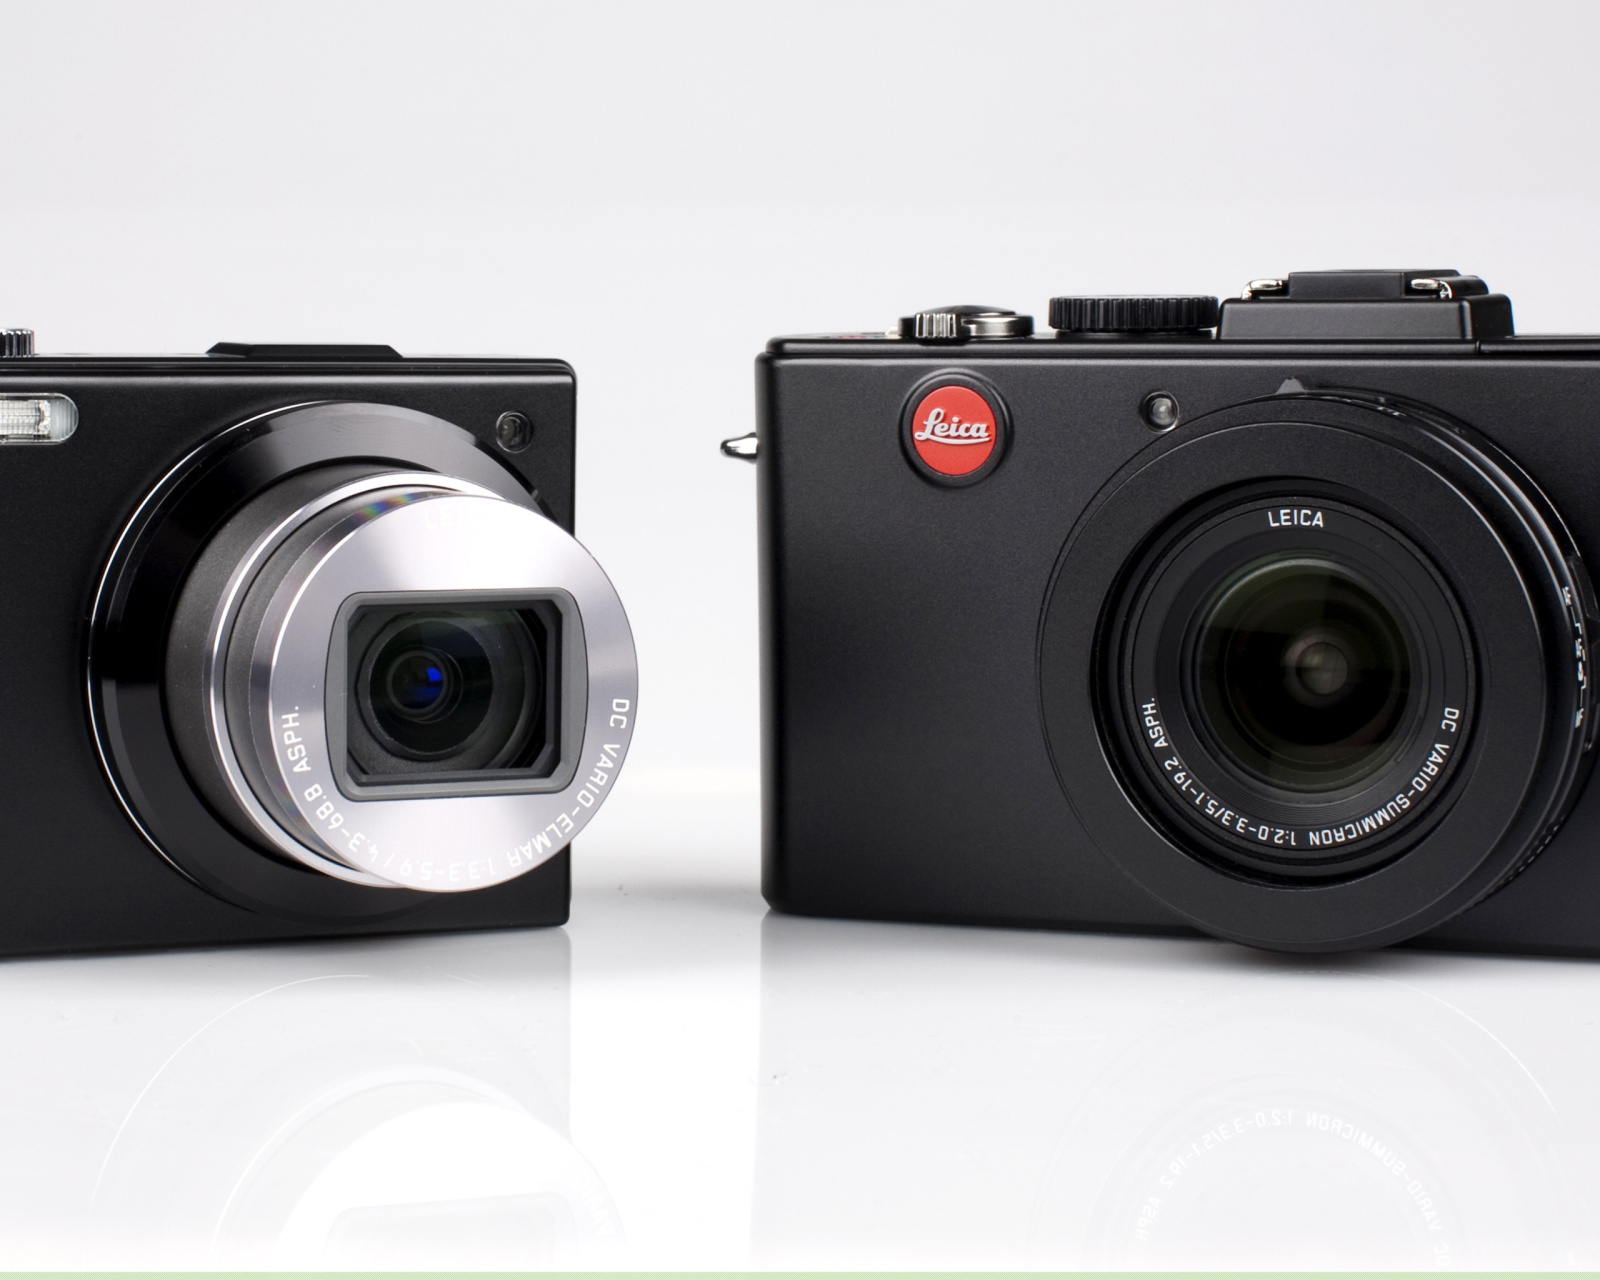 Leica D Lux 5 and Leica V LUX 1 screenshot #1 1600x1280